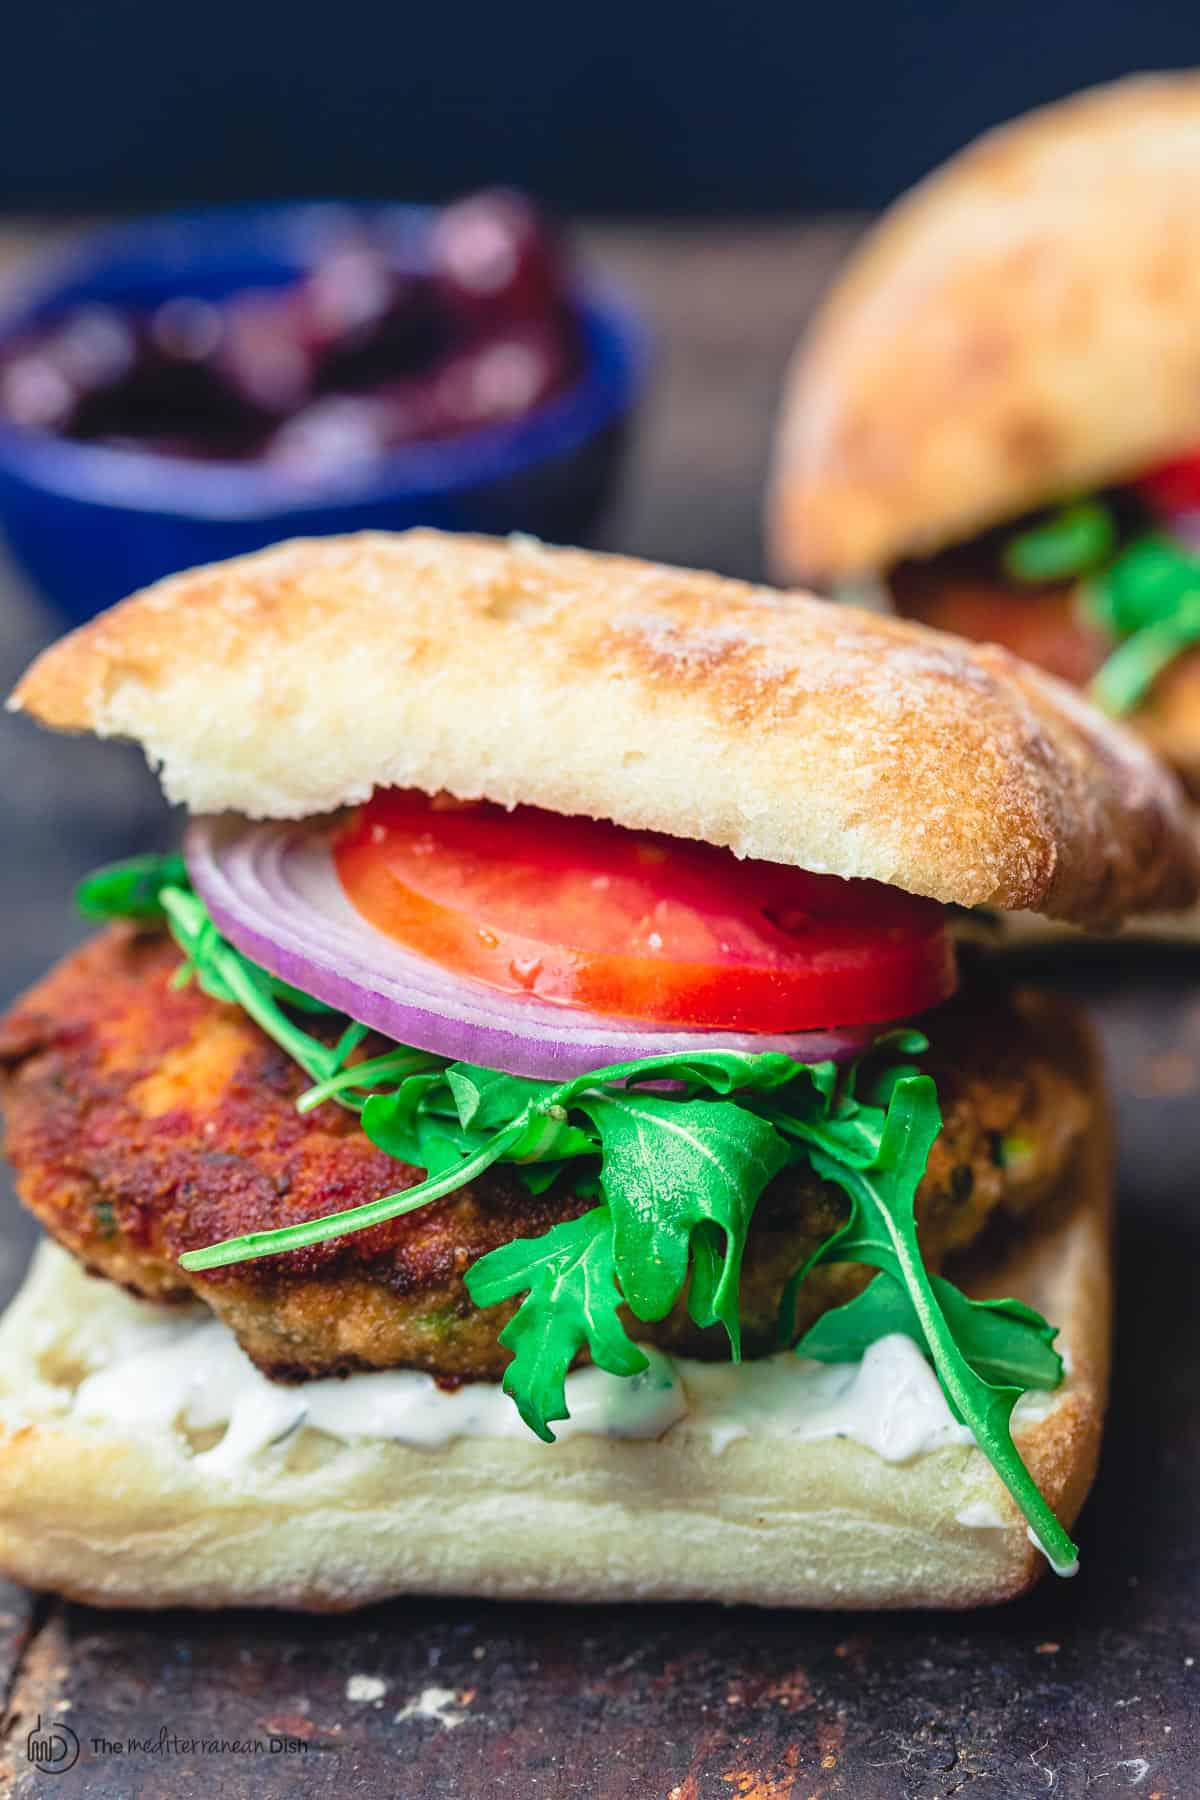 Juicy salmon burgers, served in Italian ciabatta rolls with arugula, tomatoes, and sliced onions